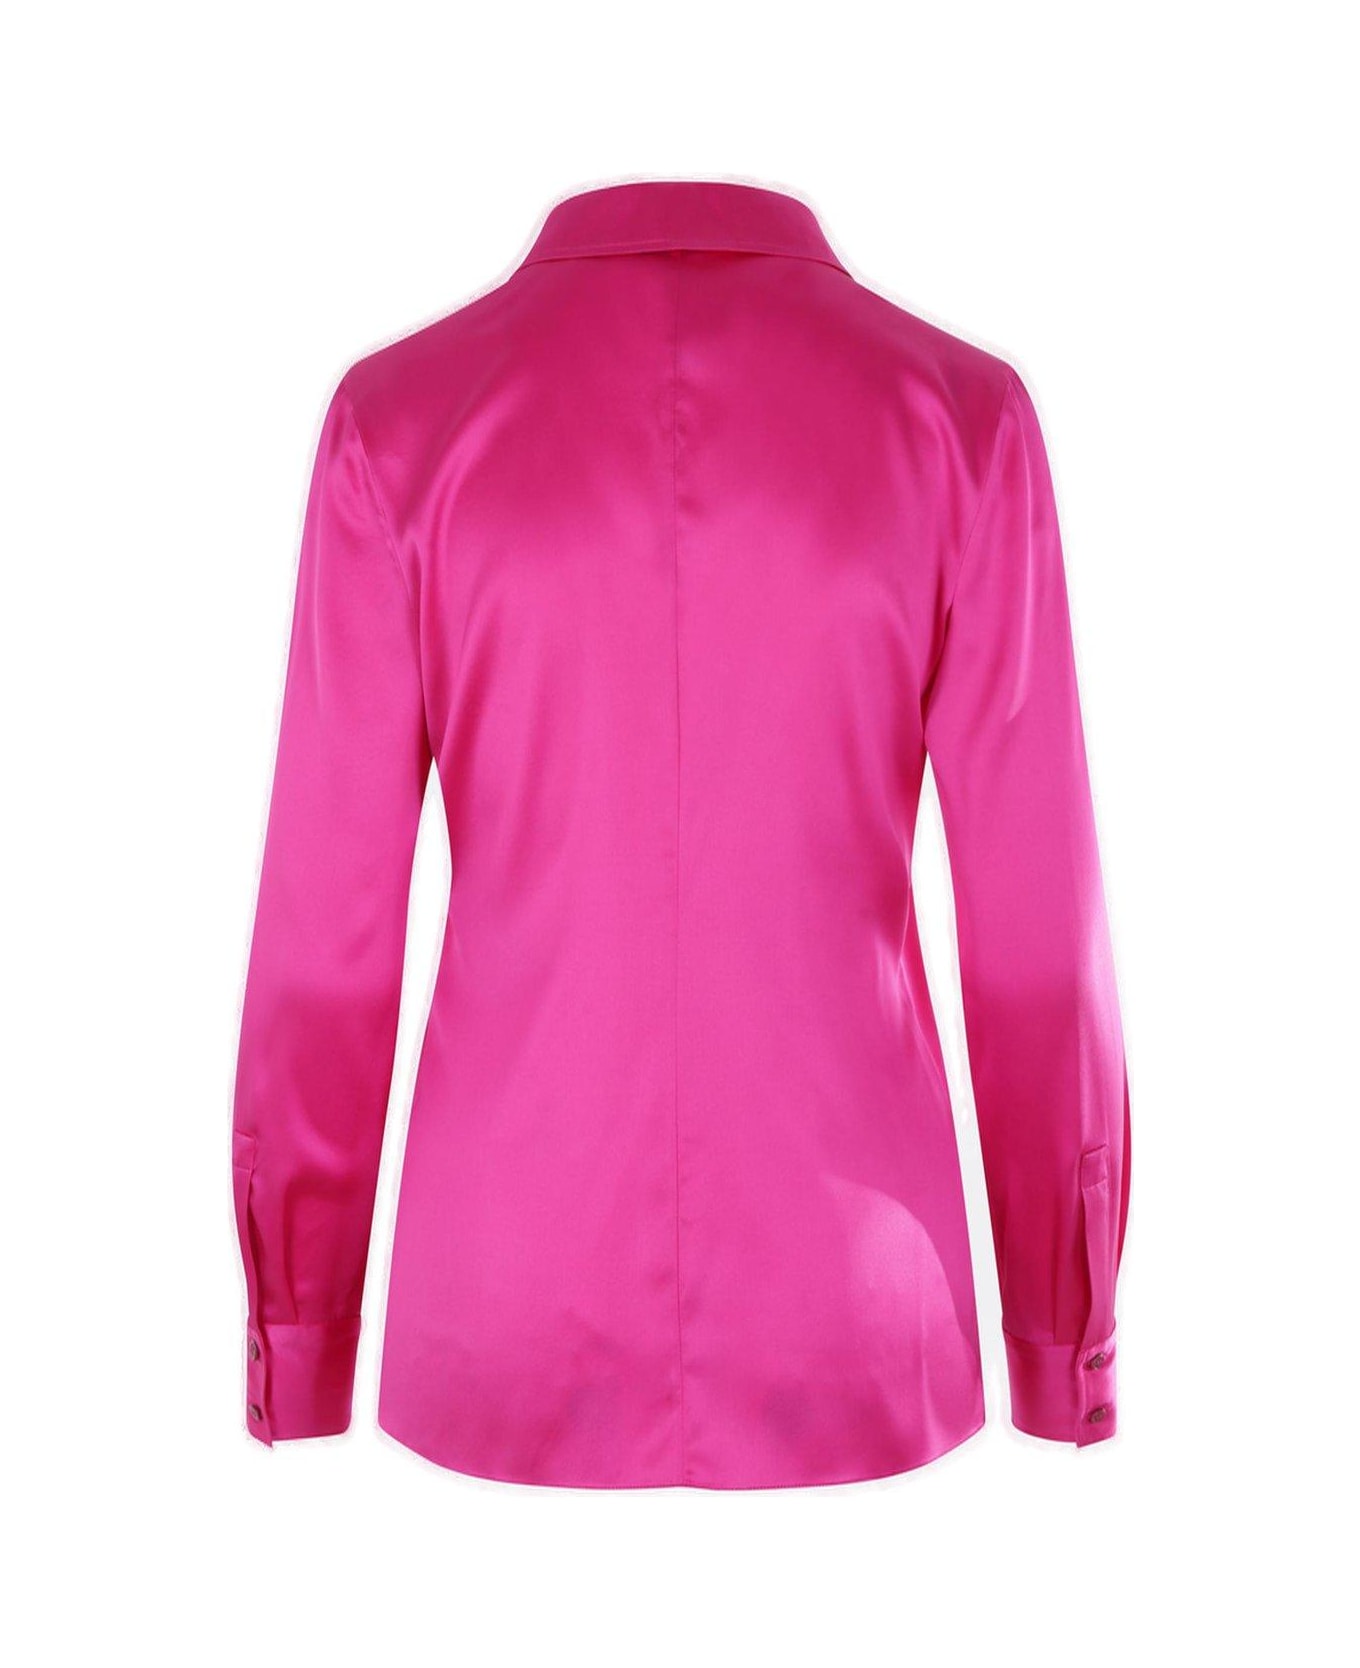 Tom Ford Buttoned Long-sleeved Shirt - Fuchsia シャツ